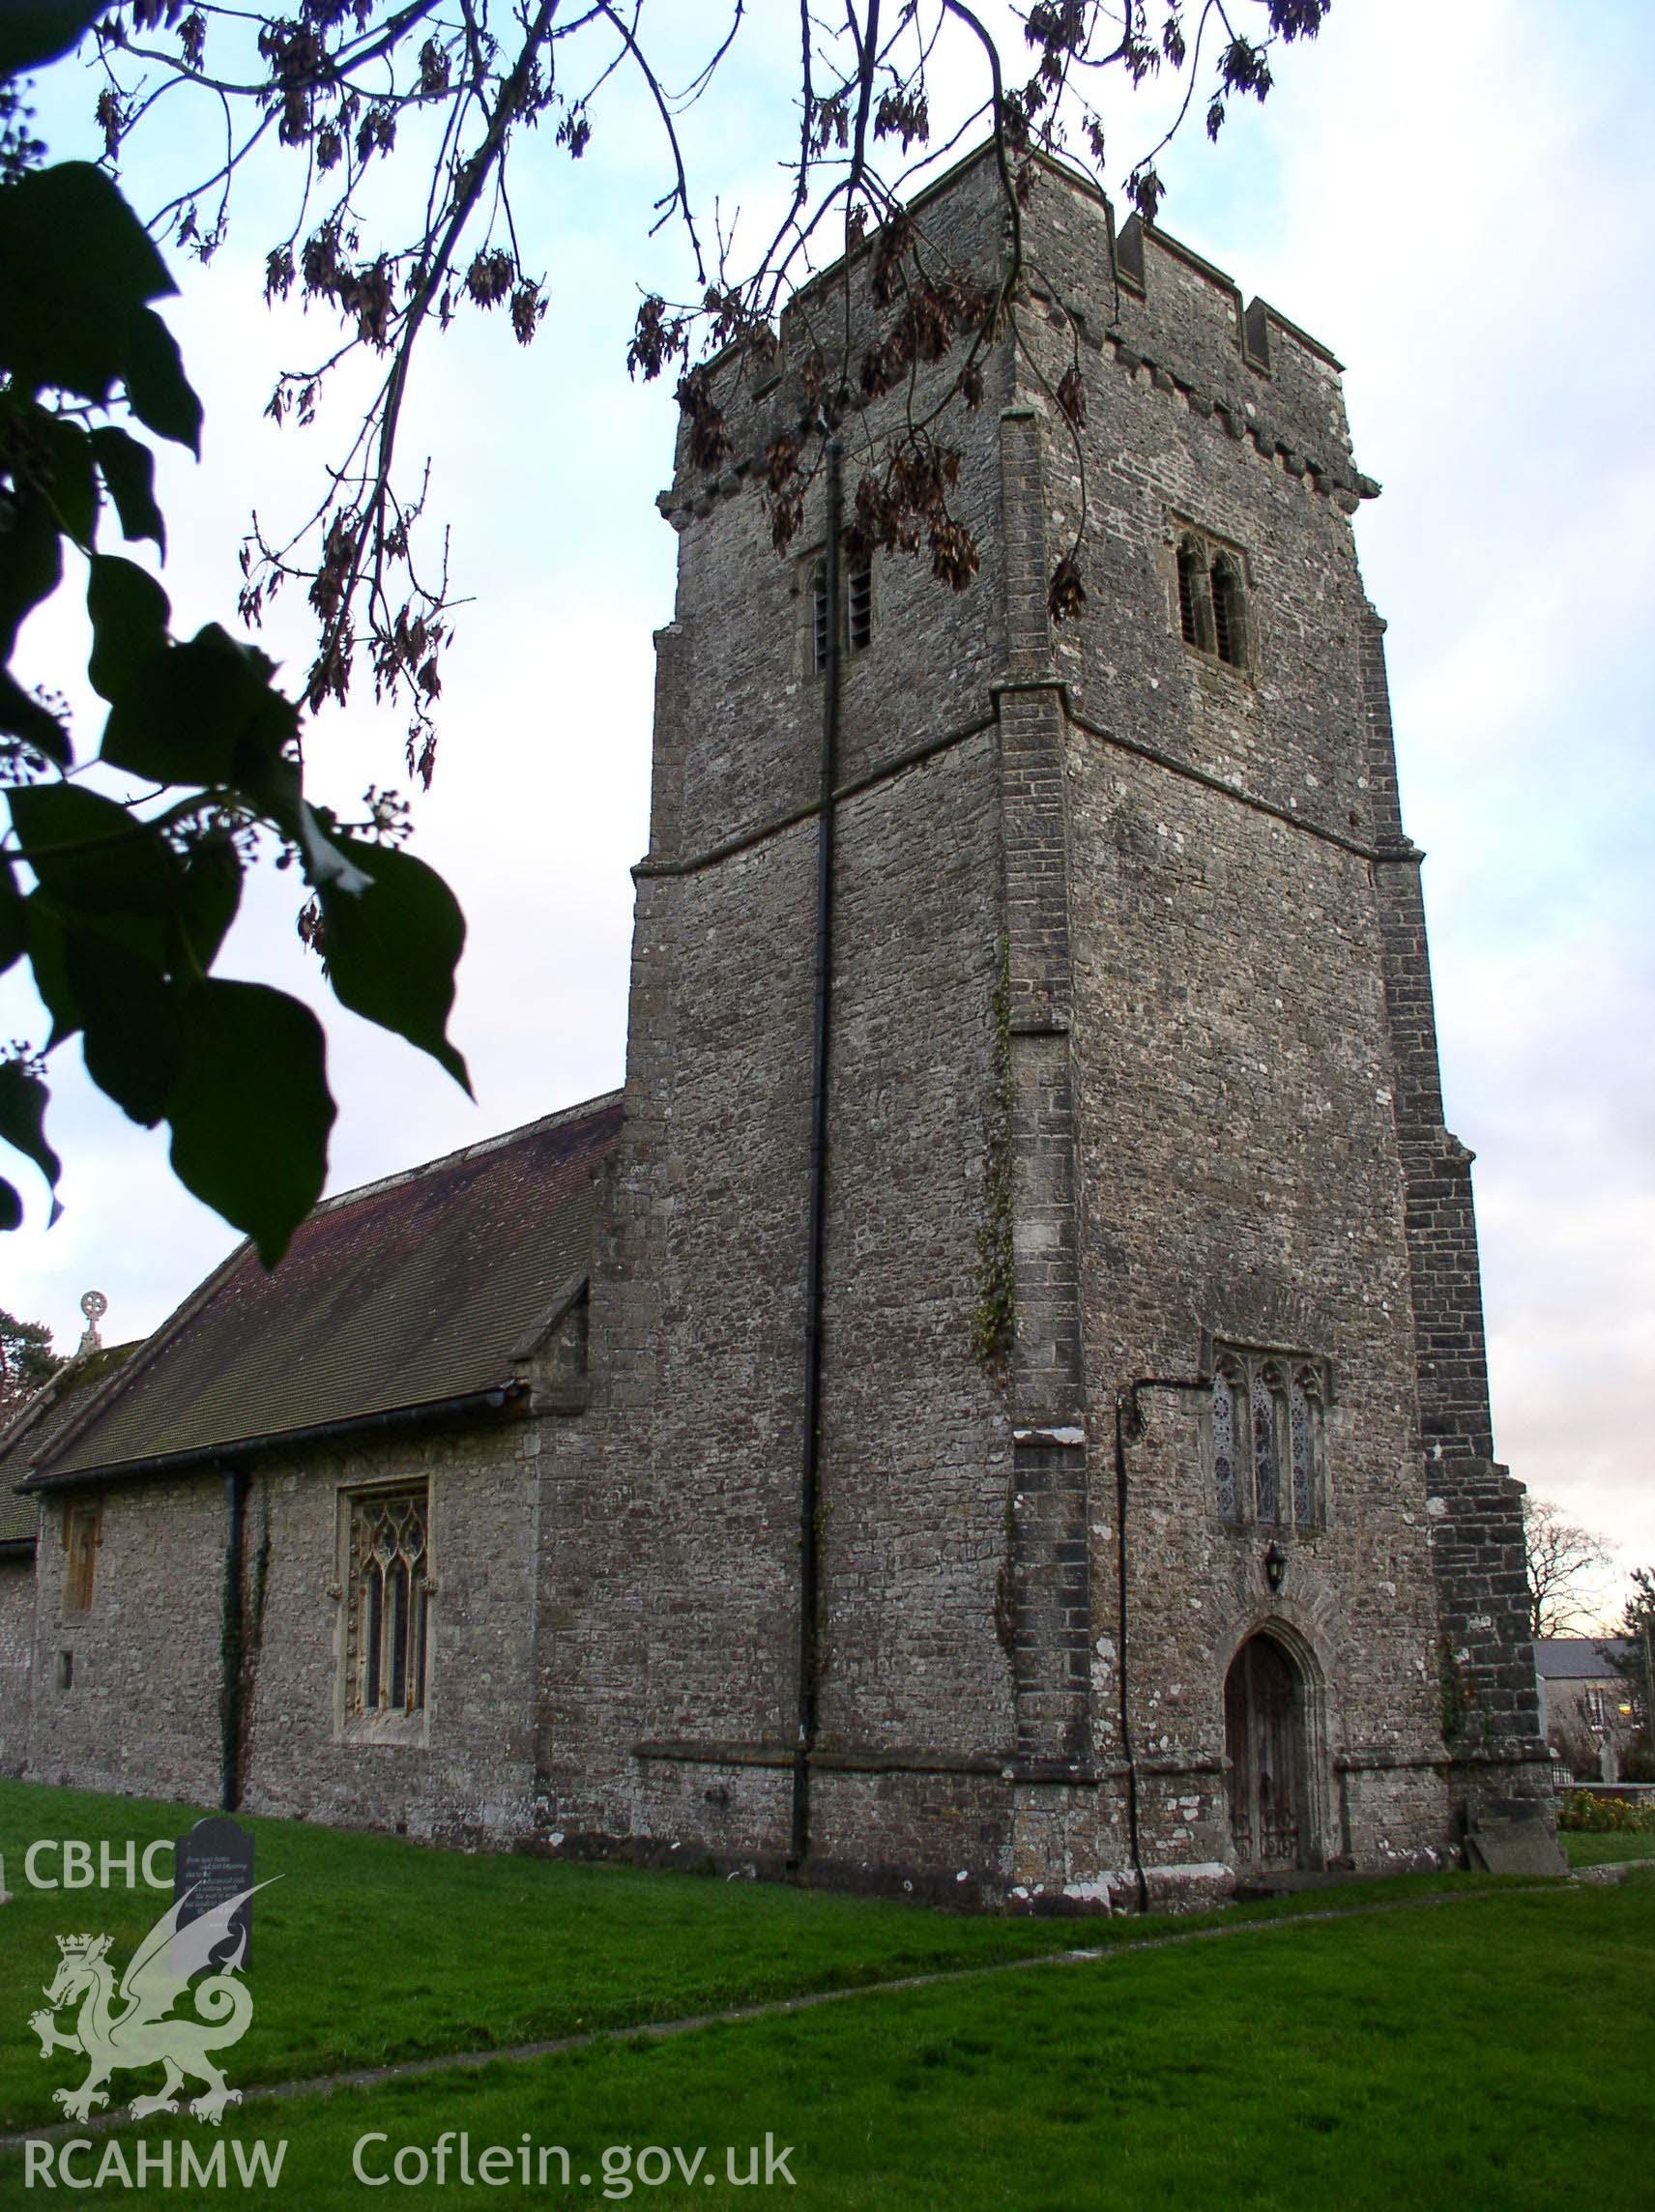 Colour digital photograph showing a three quarter elevation view of St Hilary's Church, St Hilary; Glamorgan.